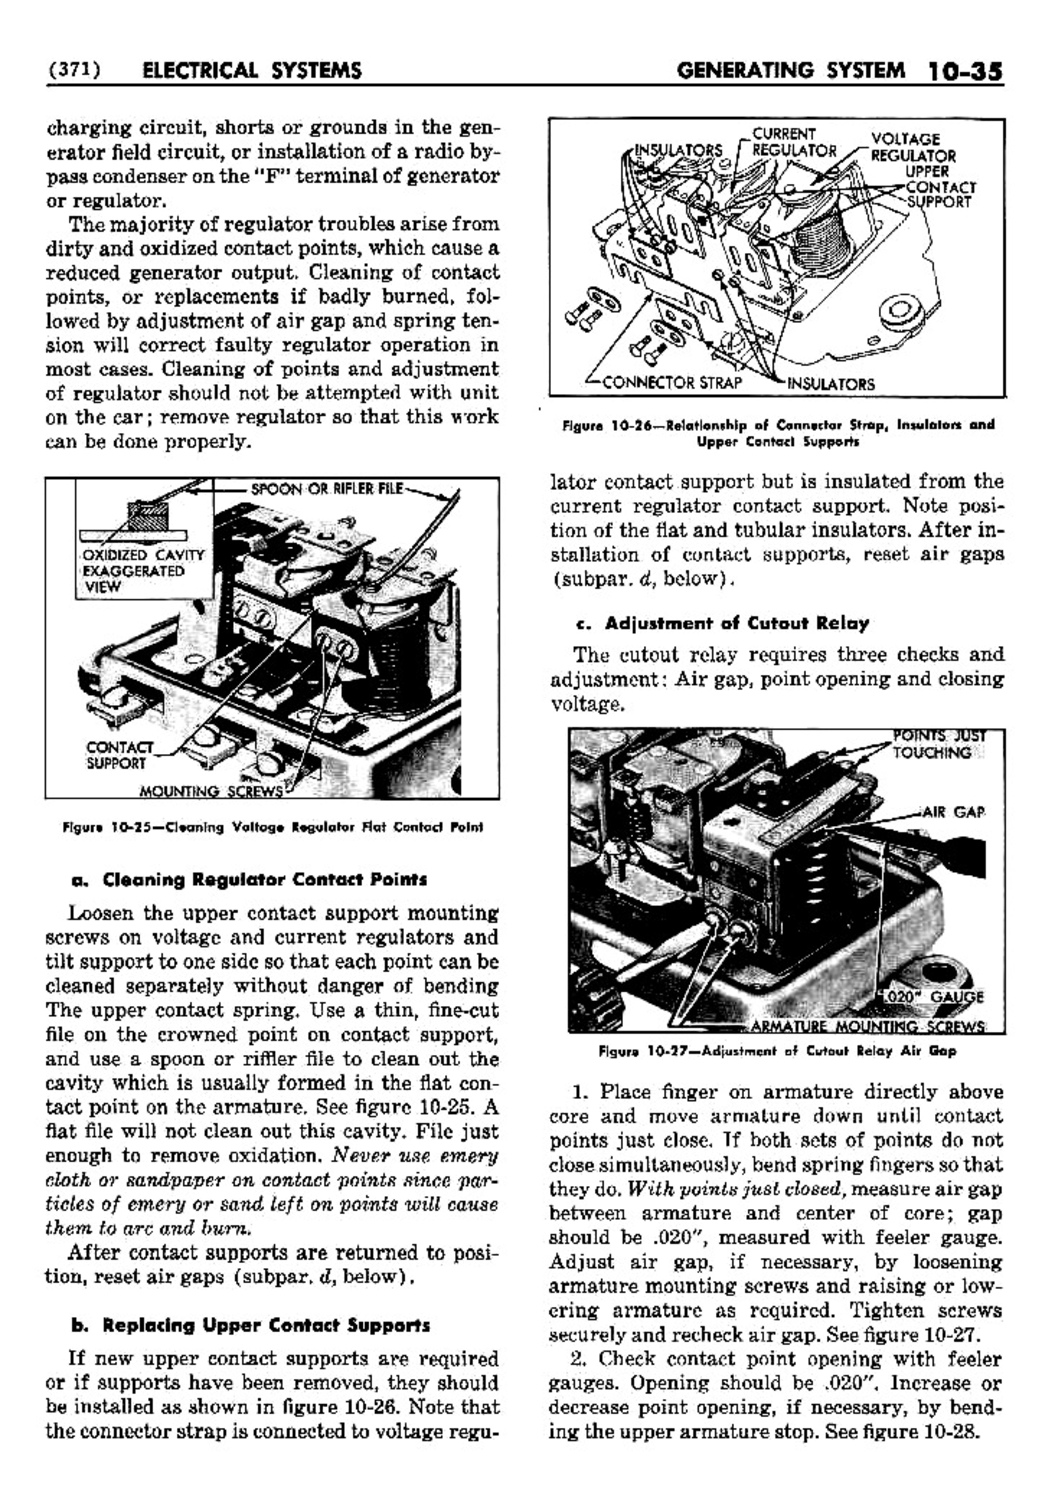 n_11 1952 Buick Shop Manual - Electrical Systems-035-035.jpg